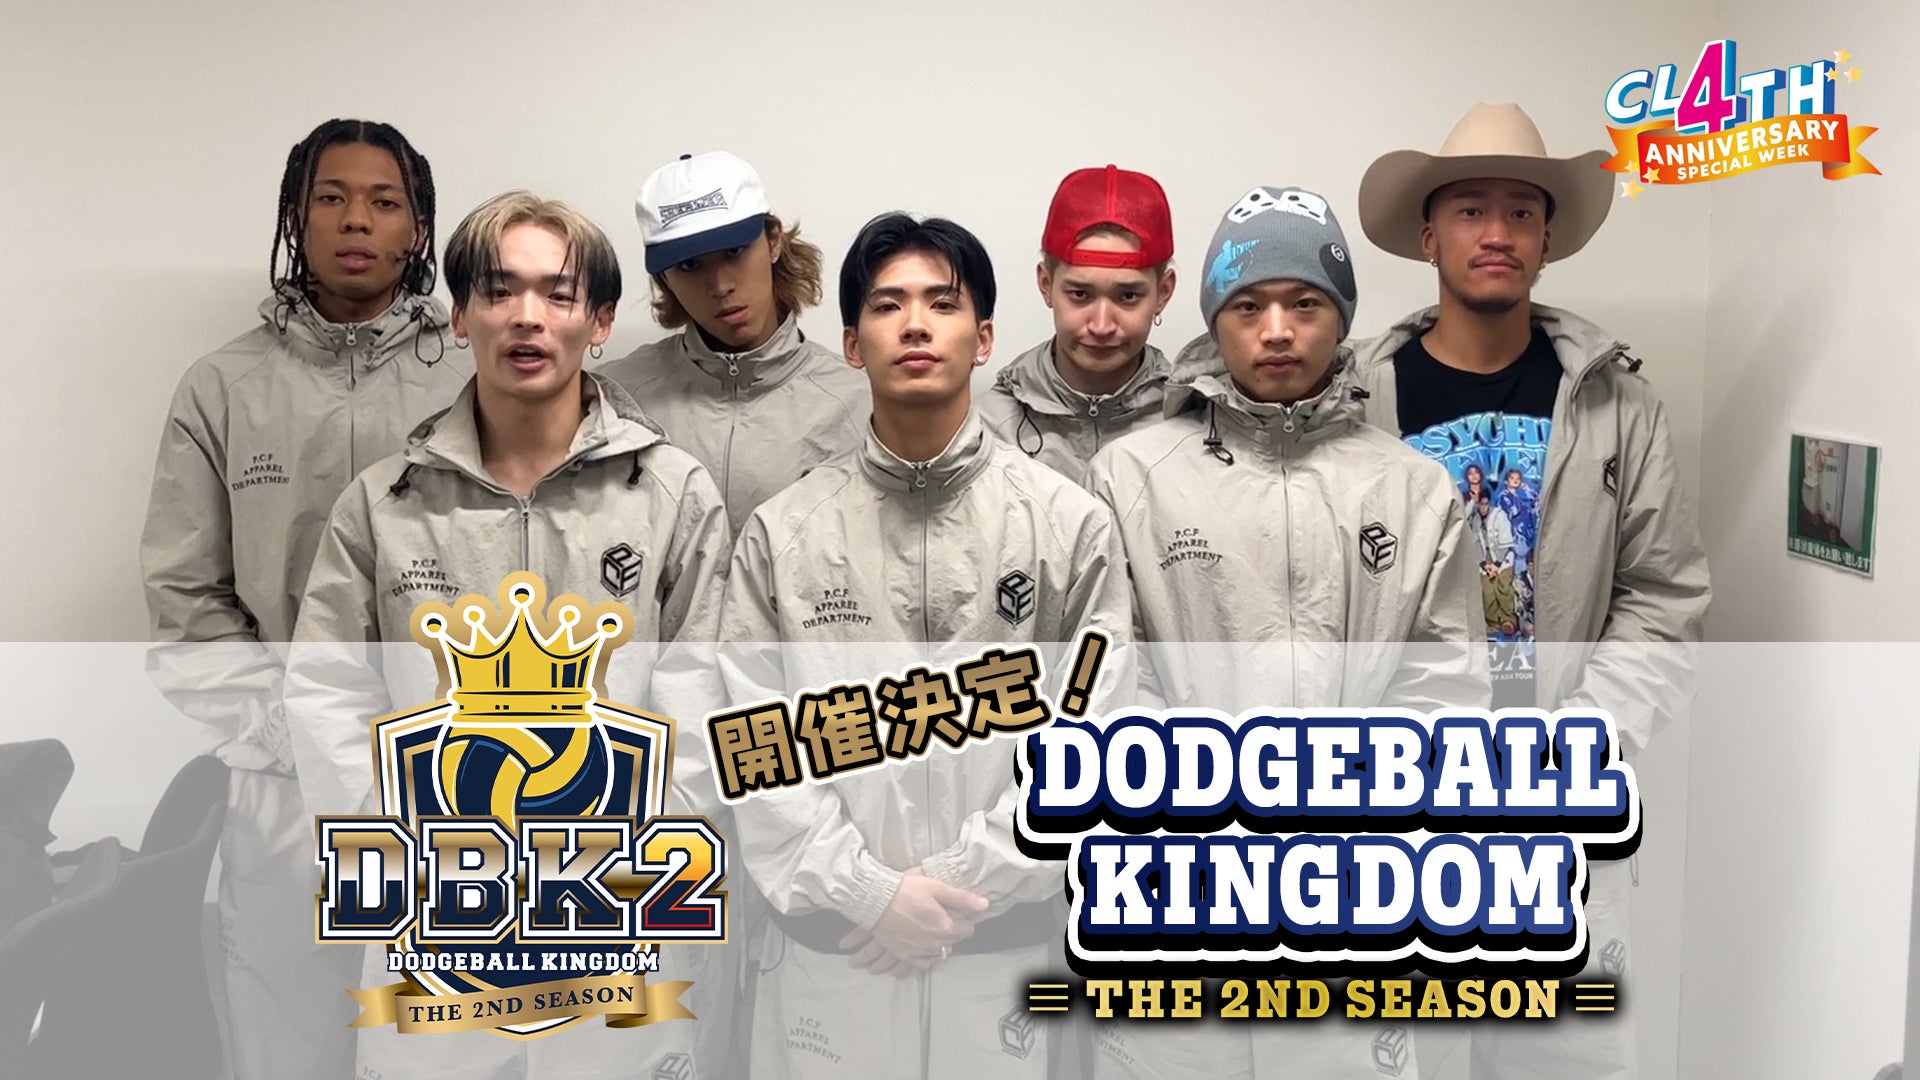 DODGEBALL KINGDOM 〜THE 2ND SEASON〜」 Message from NEO EXILE | CL 